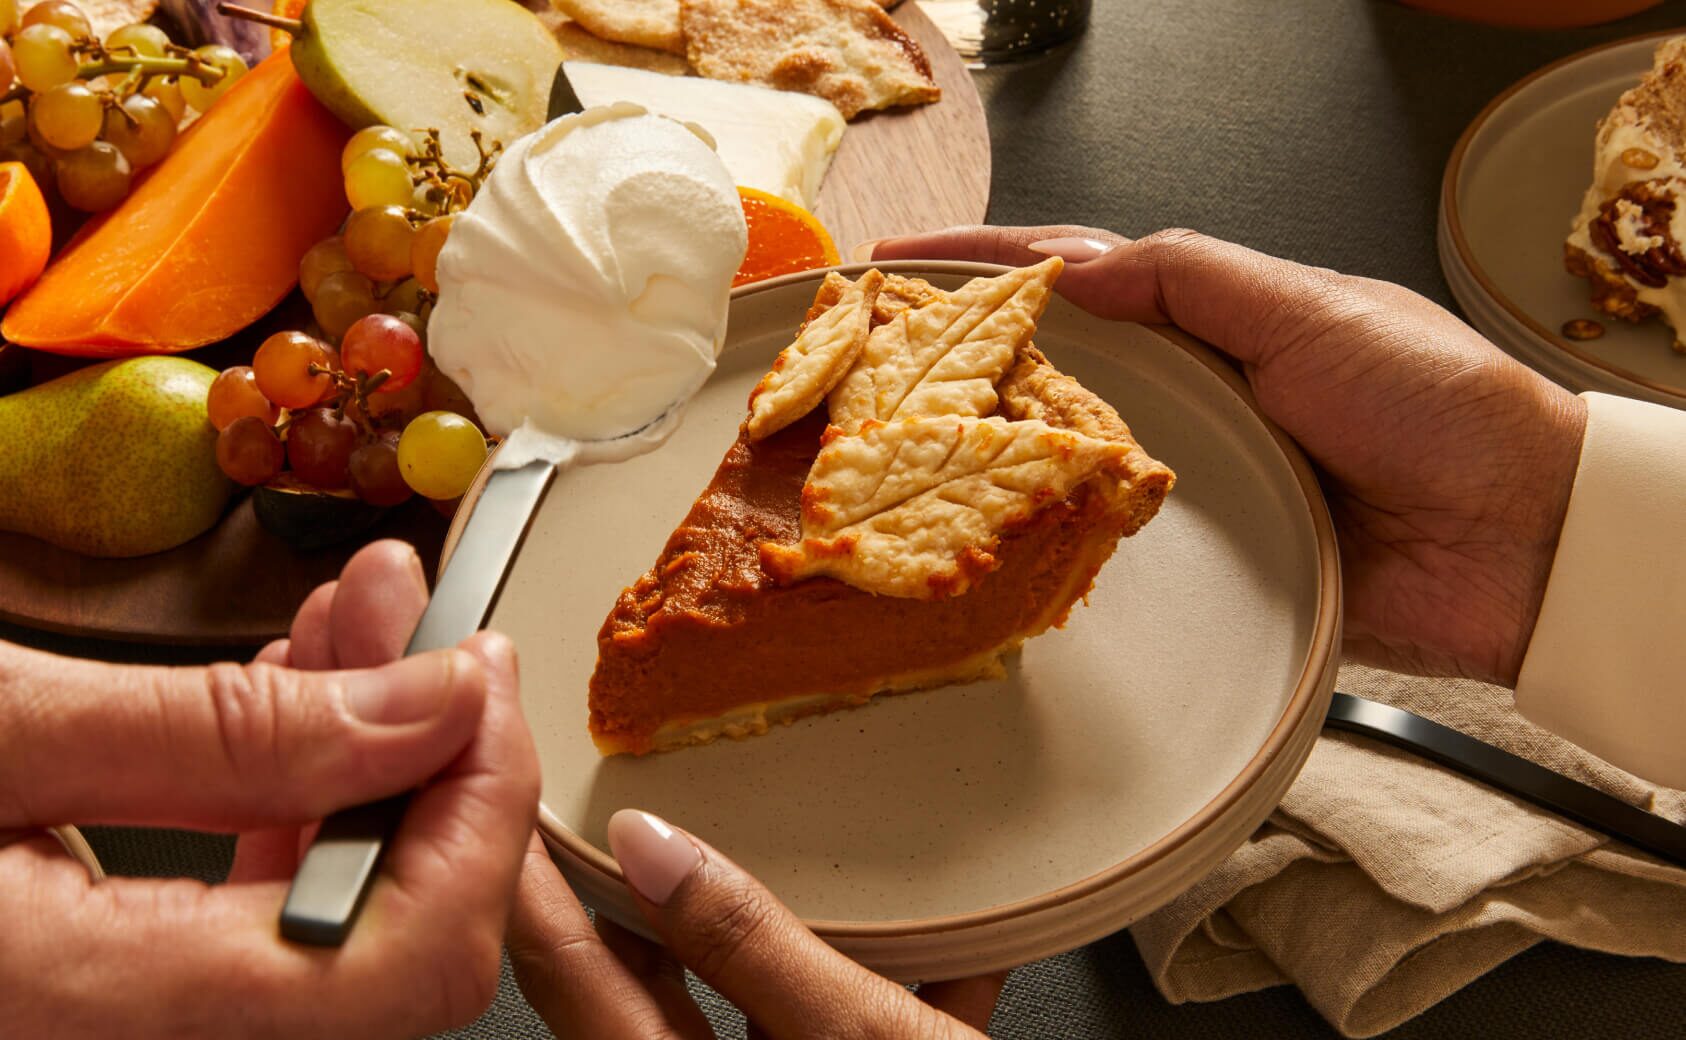 Pumpkin pie being served on a OUI ridged ceramic plate with a dollop of whipped cream.